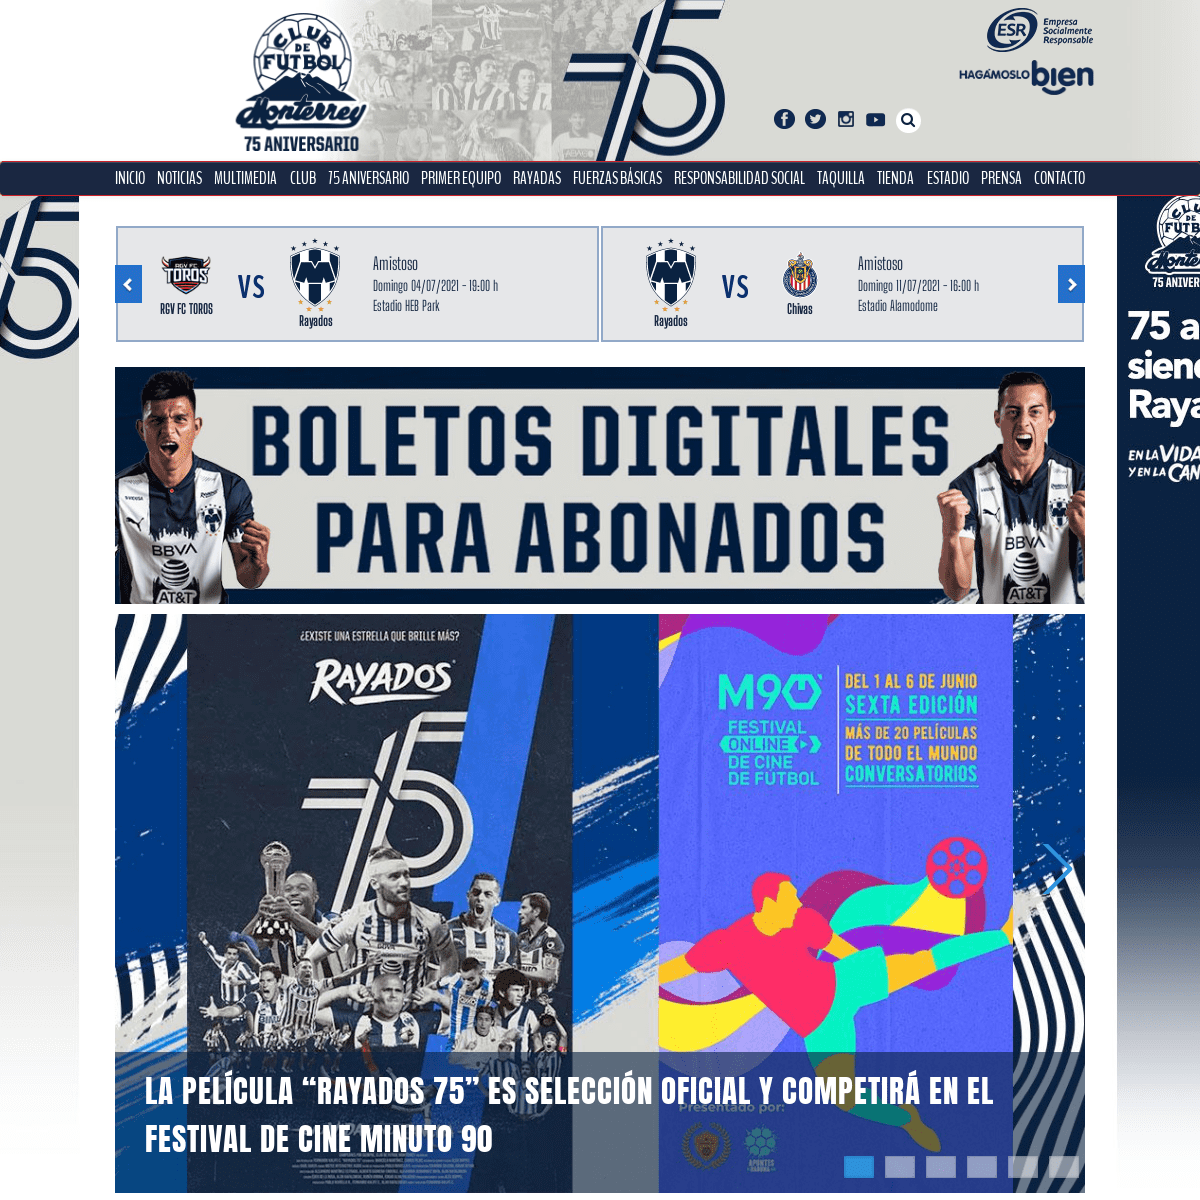 A complete backup of https://rayados.com